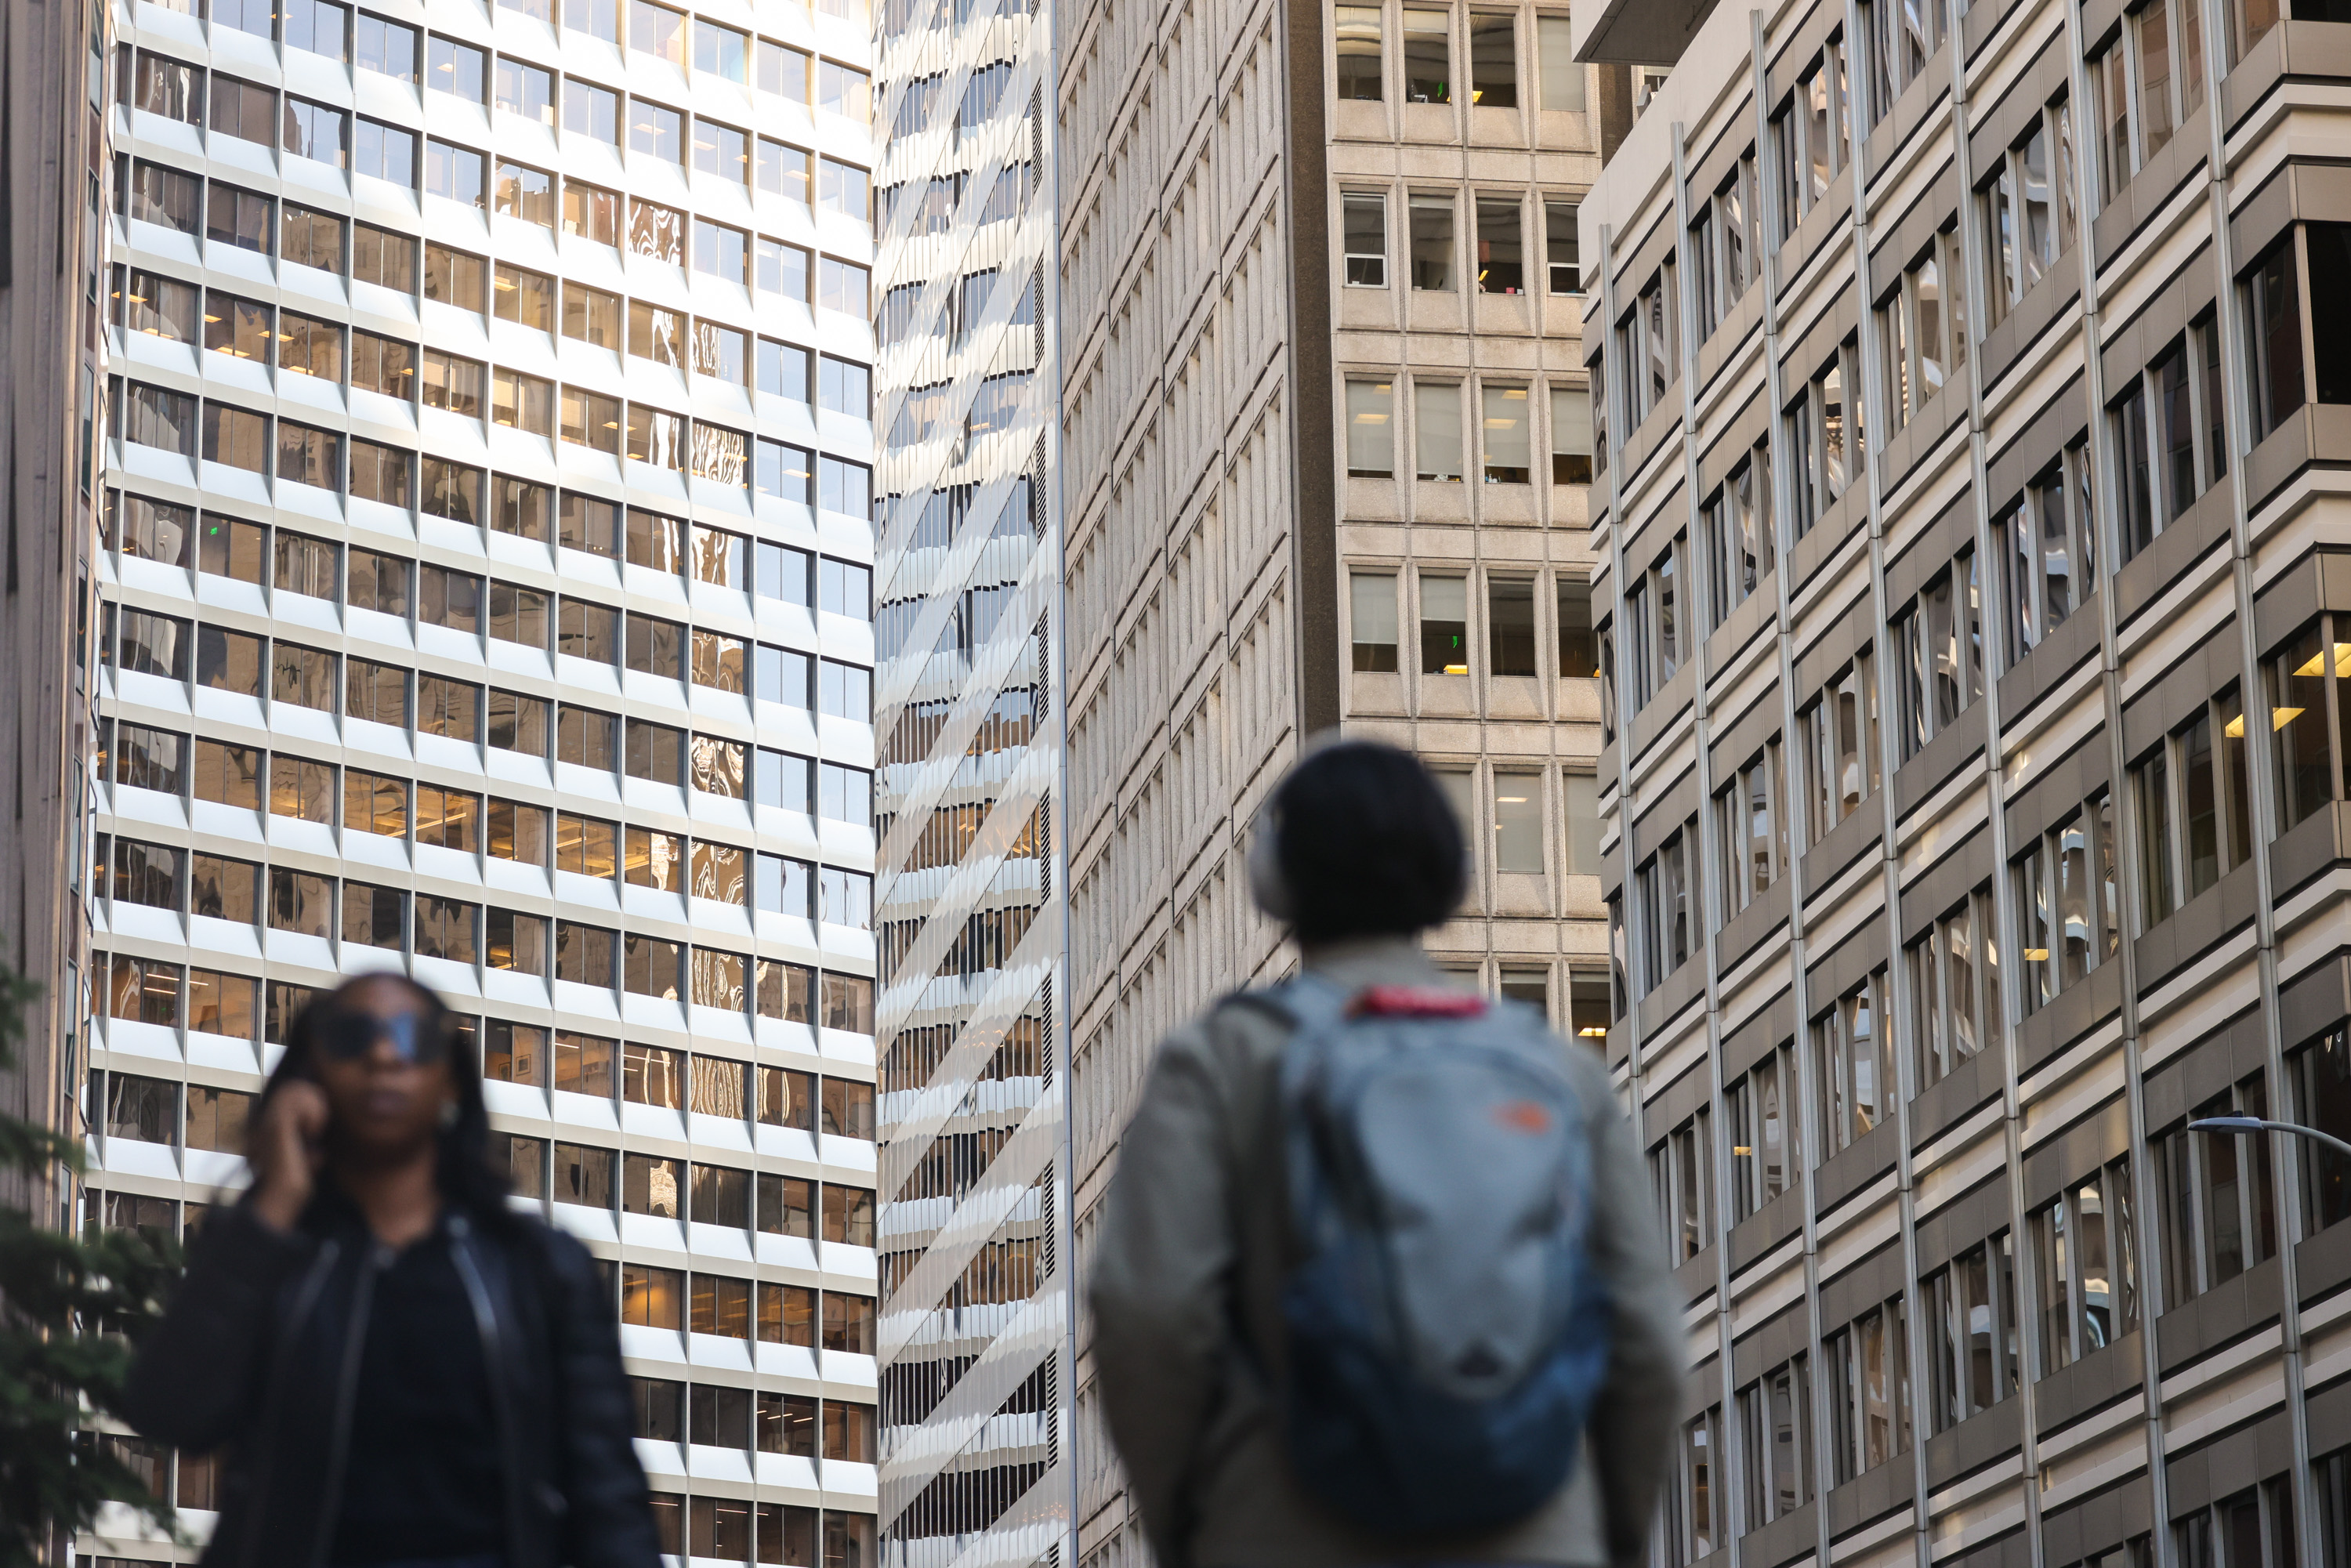 Two people walk in front of tall office buildings, one person wearing sunglasses and using a phone, the other carrying a backpack.